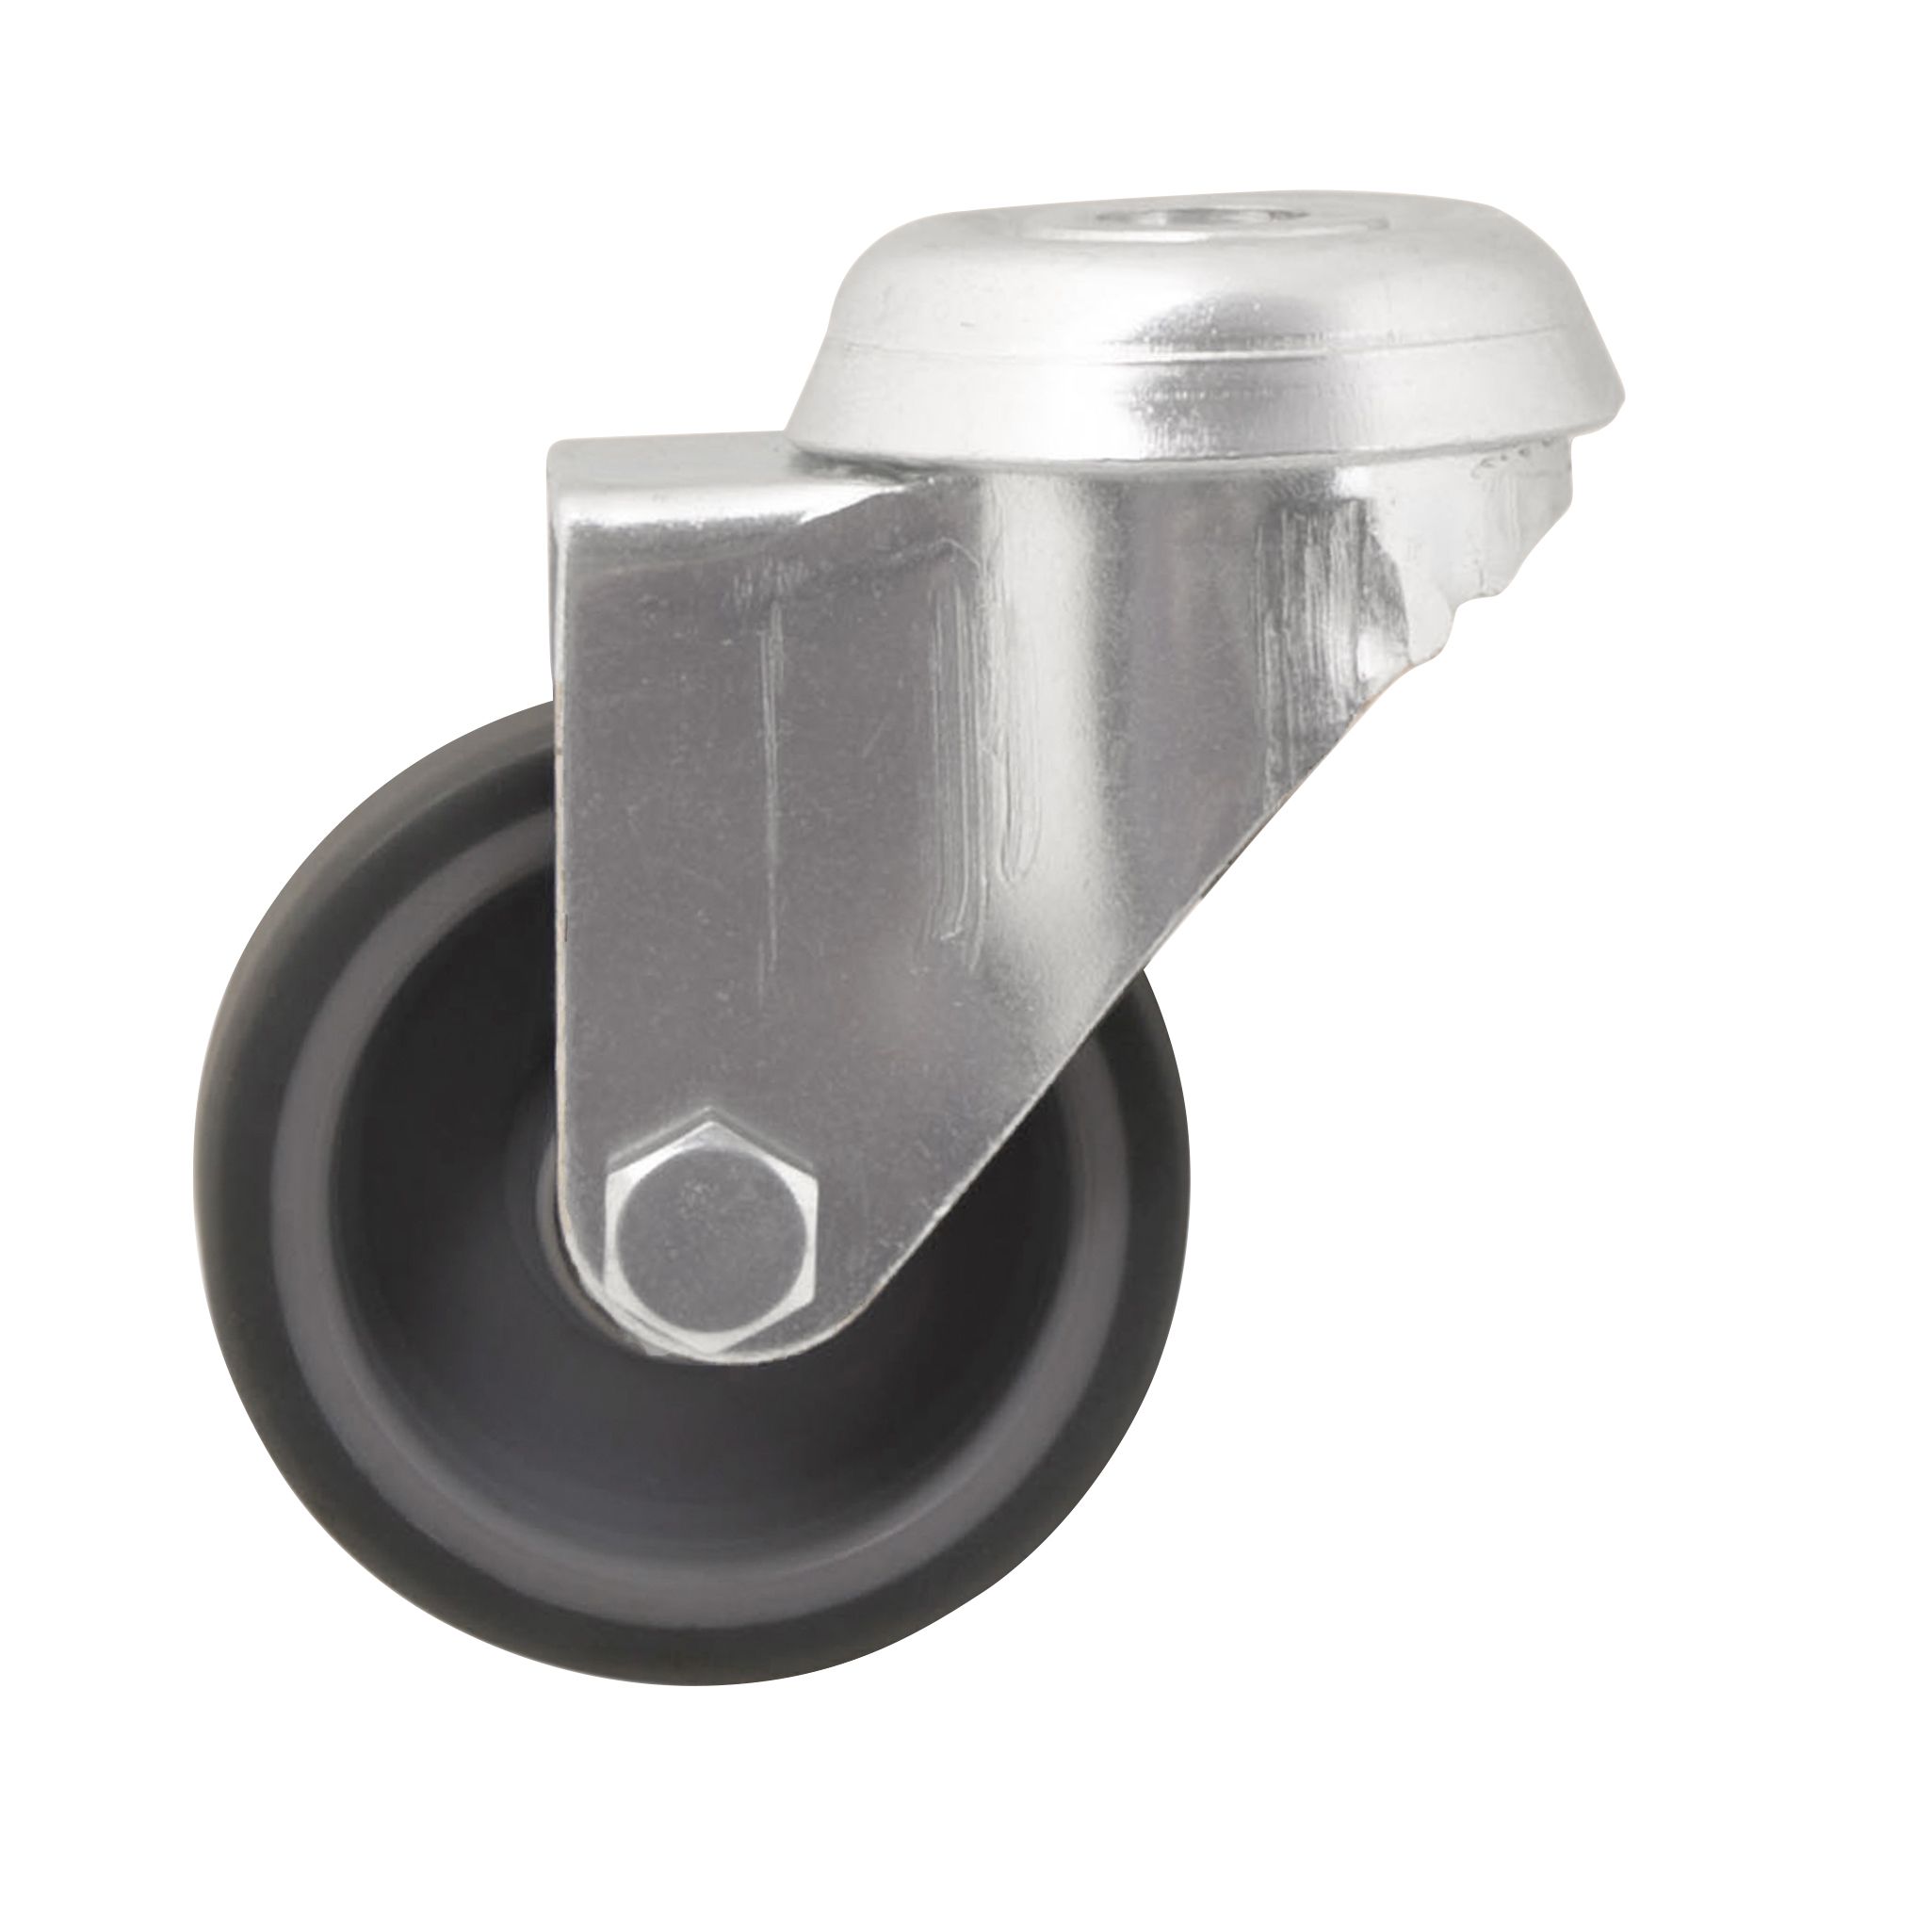 Unbraked Light duty Swivel Castor WC55, (Dia)50.2mm (H)68.4mm (Max. Weight)30kg